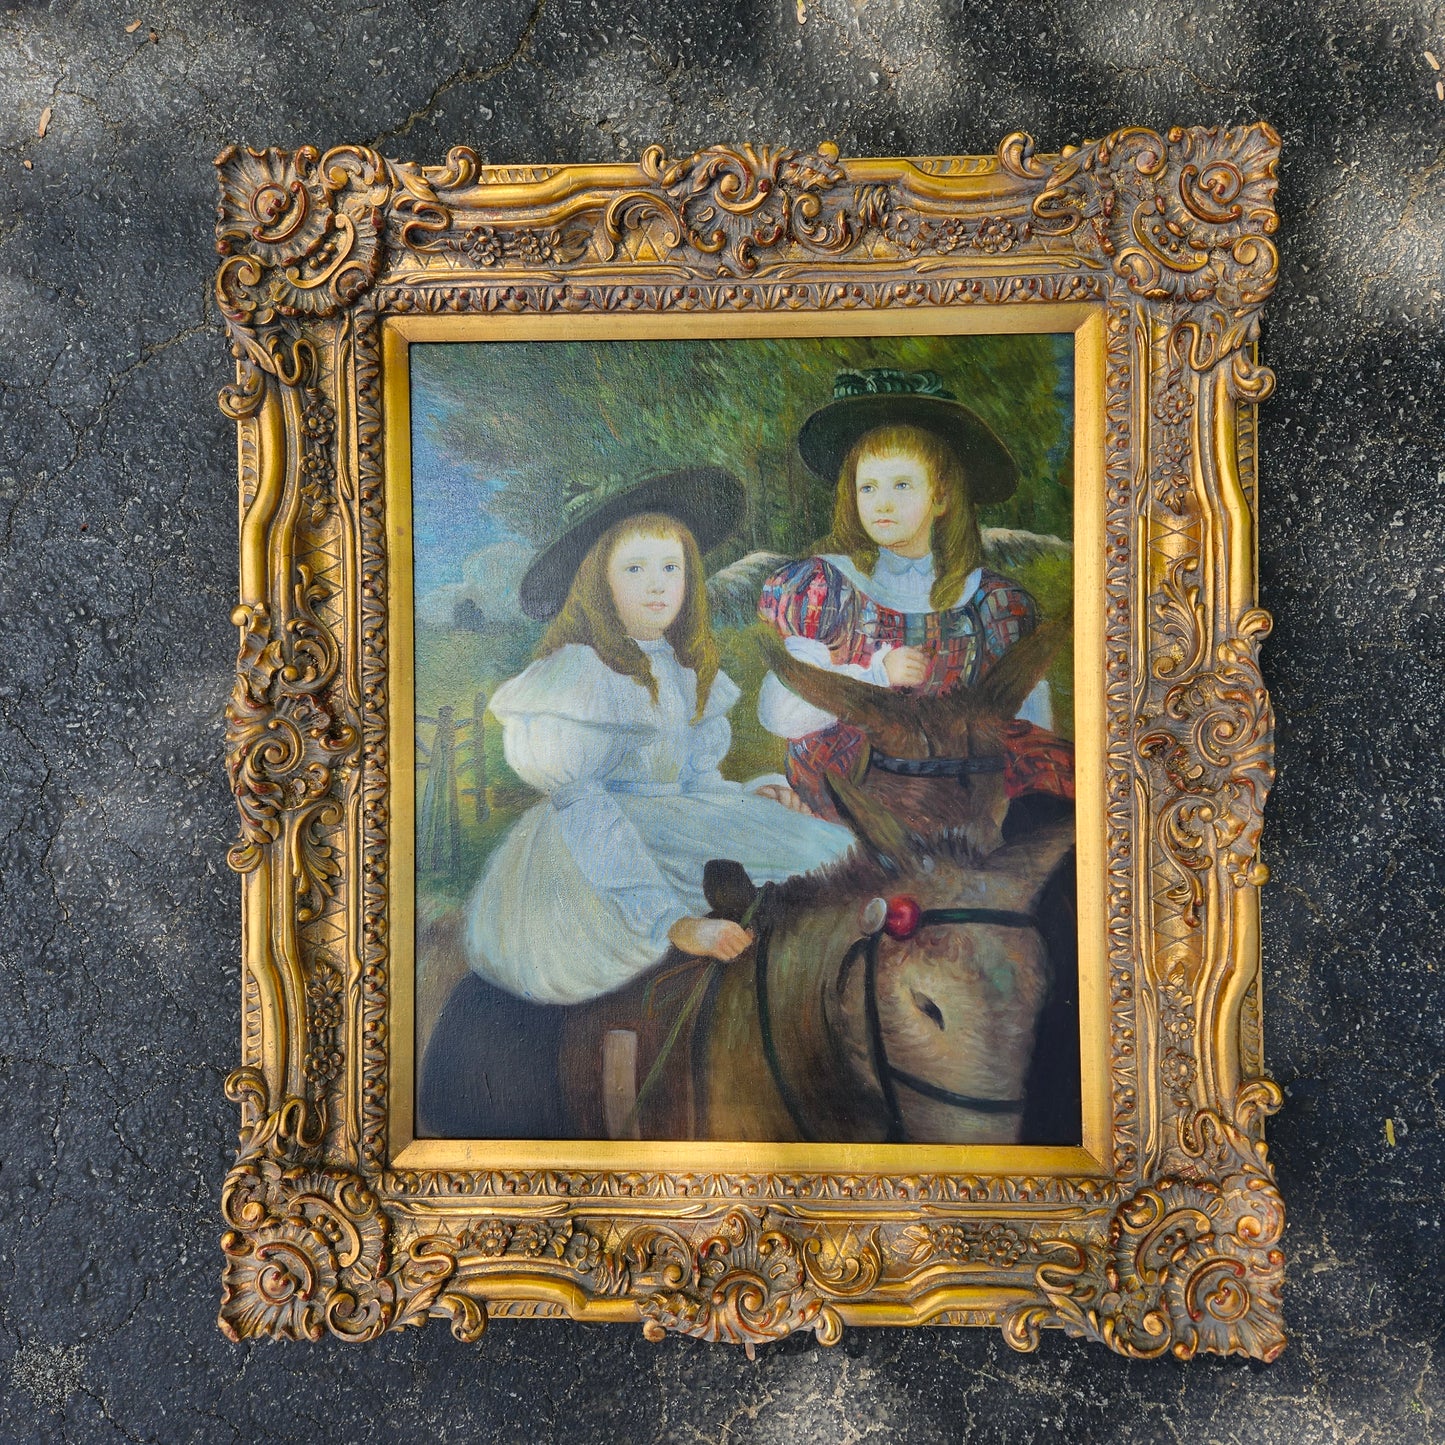 Oil on Canvas - Two Girls on Donkeys